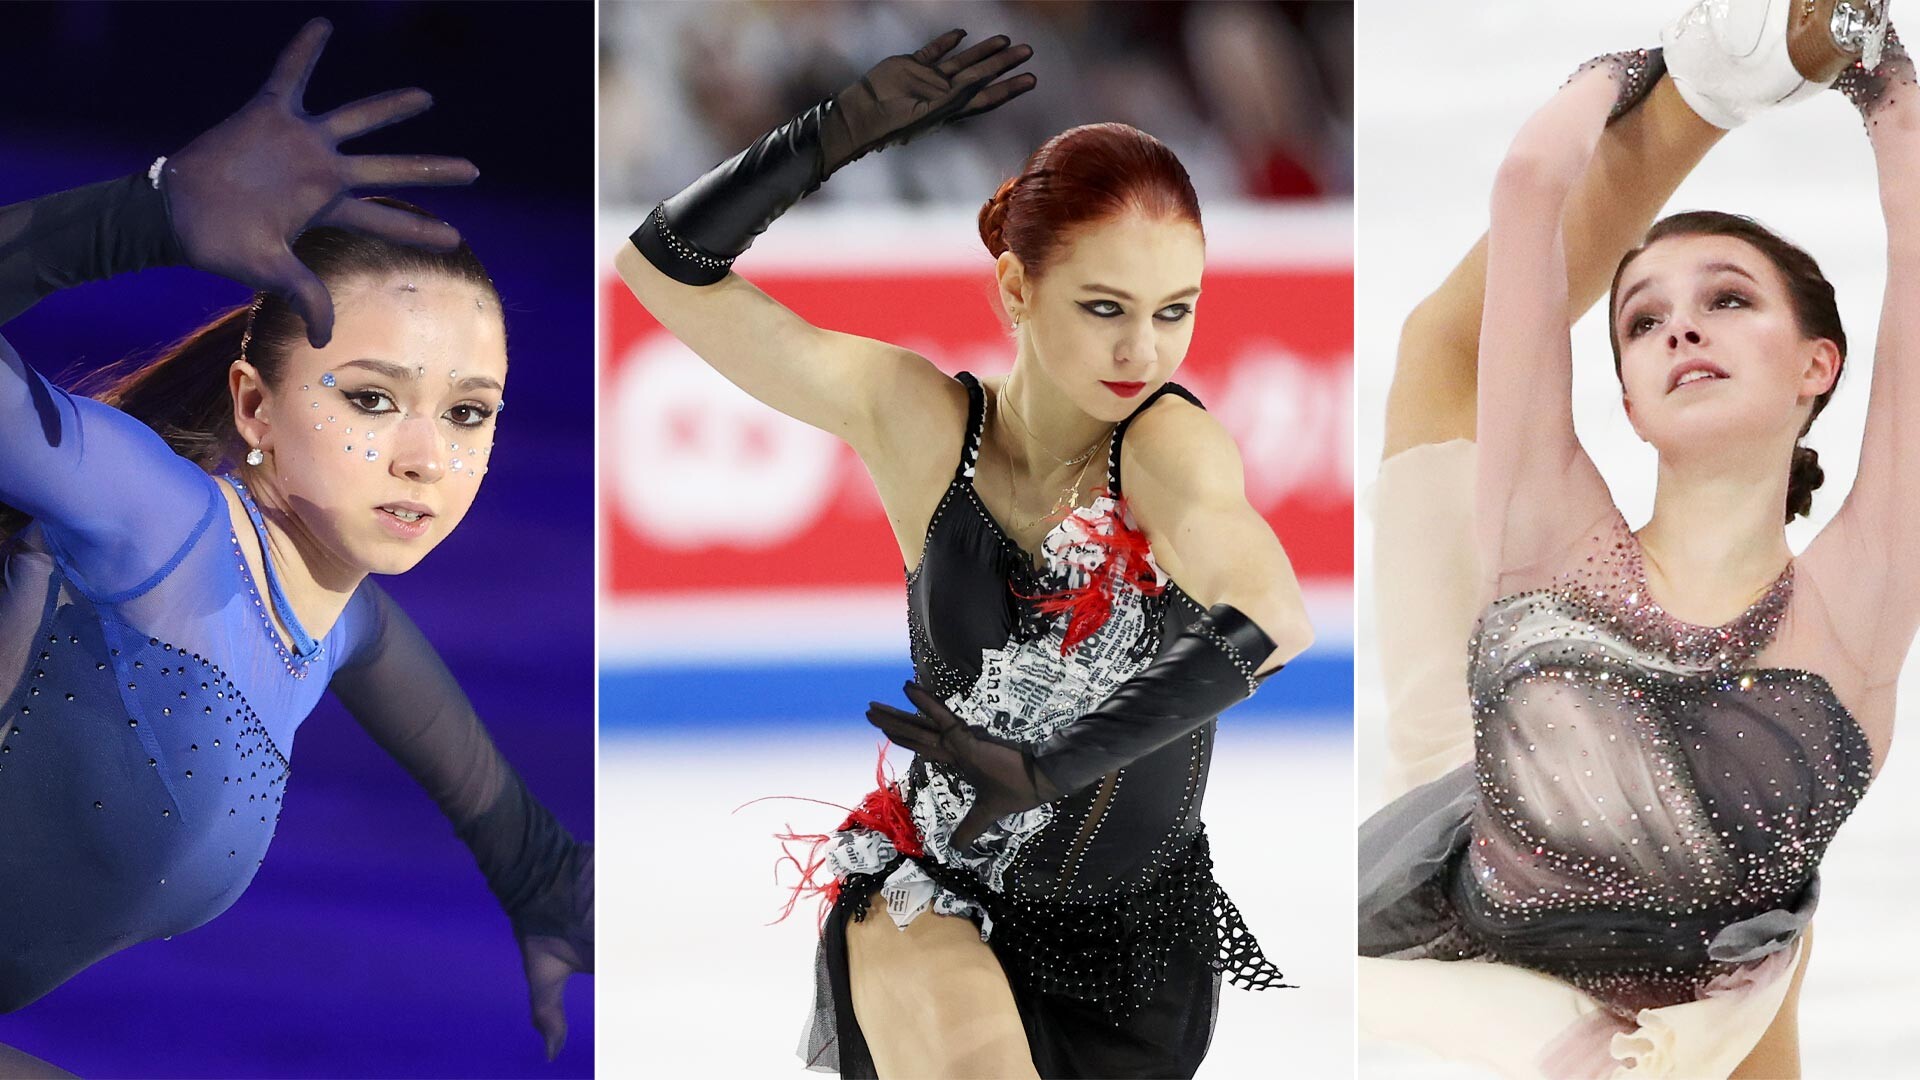 Meet the Russian figure skaters of the 2022 Winter Olympics (PHOTOS+VIDEOS) 